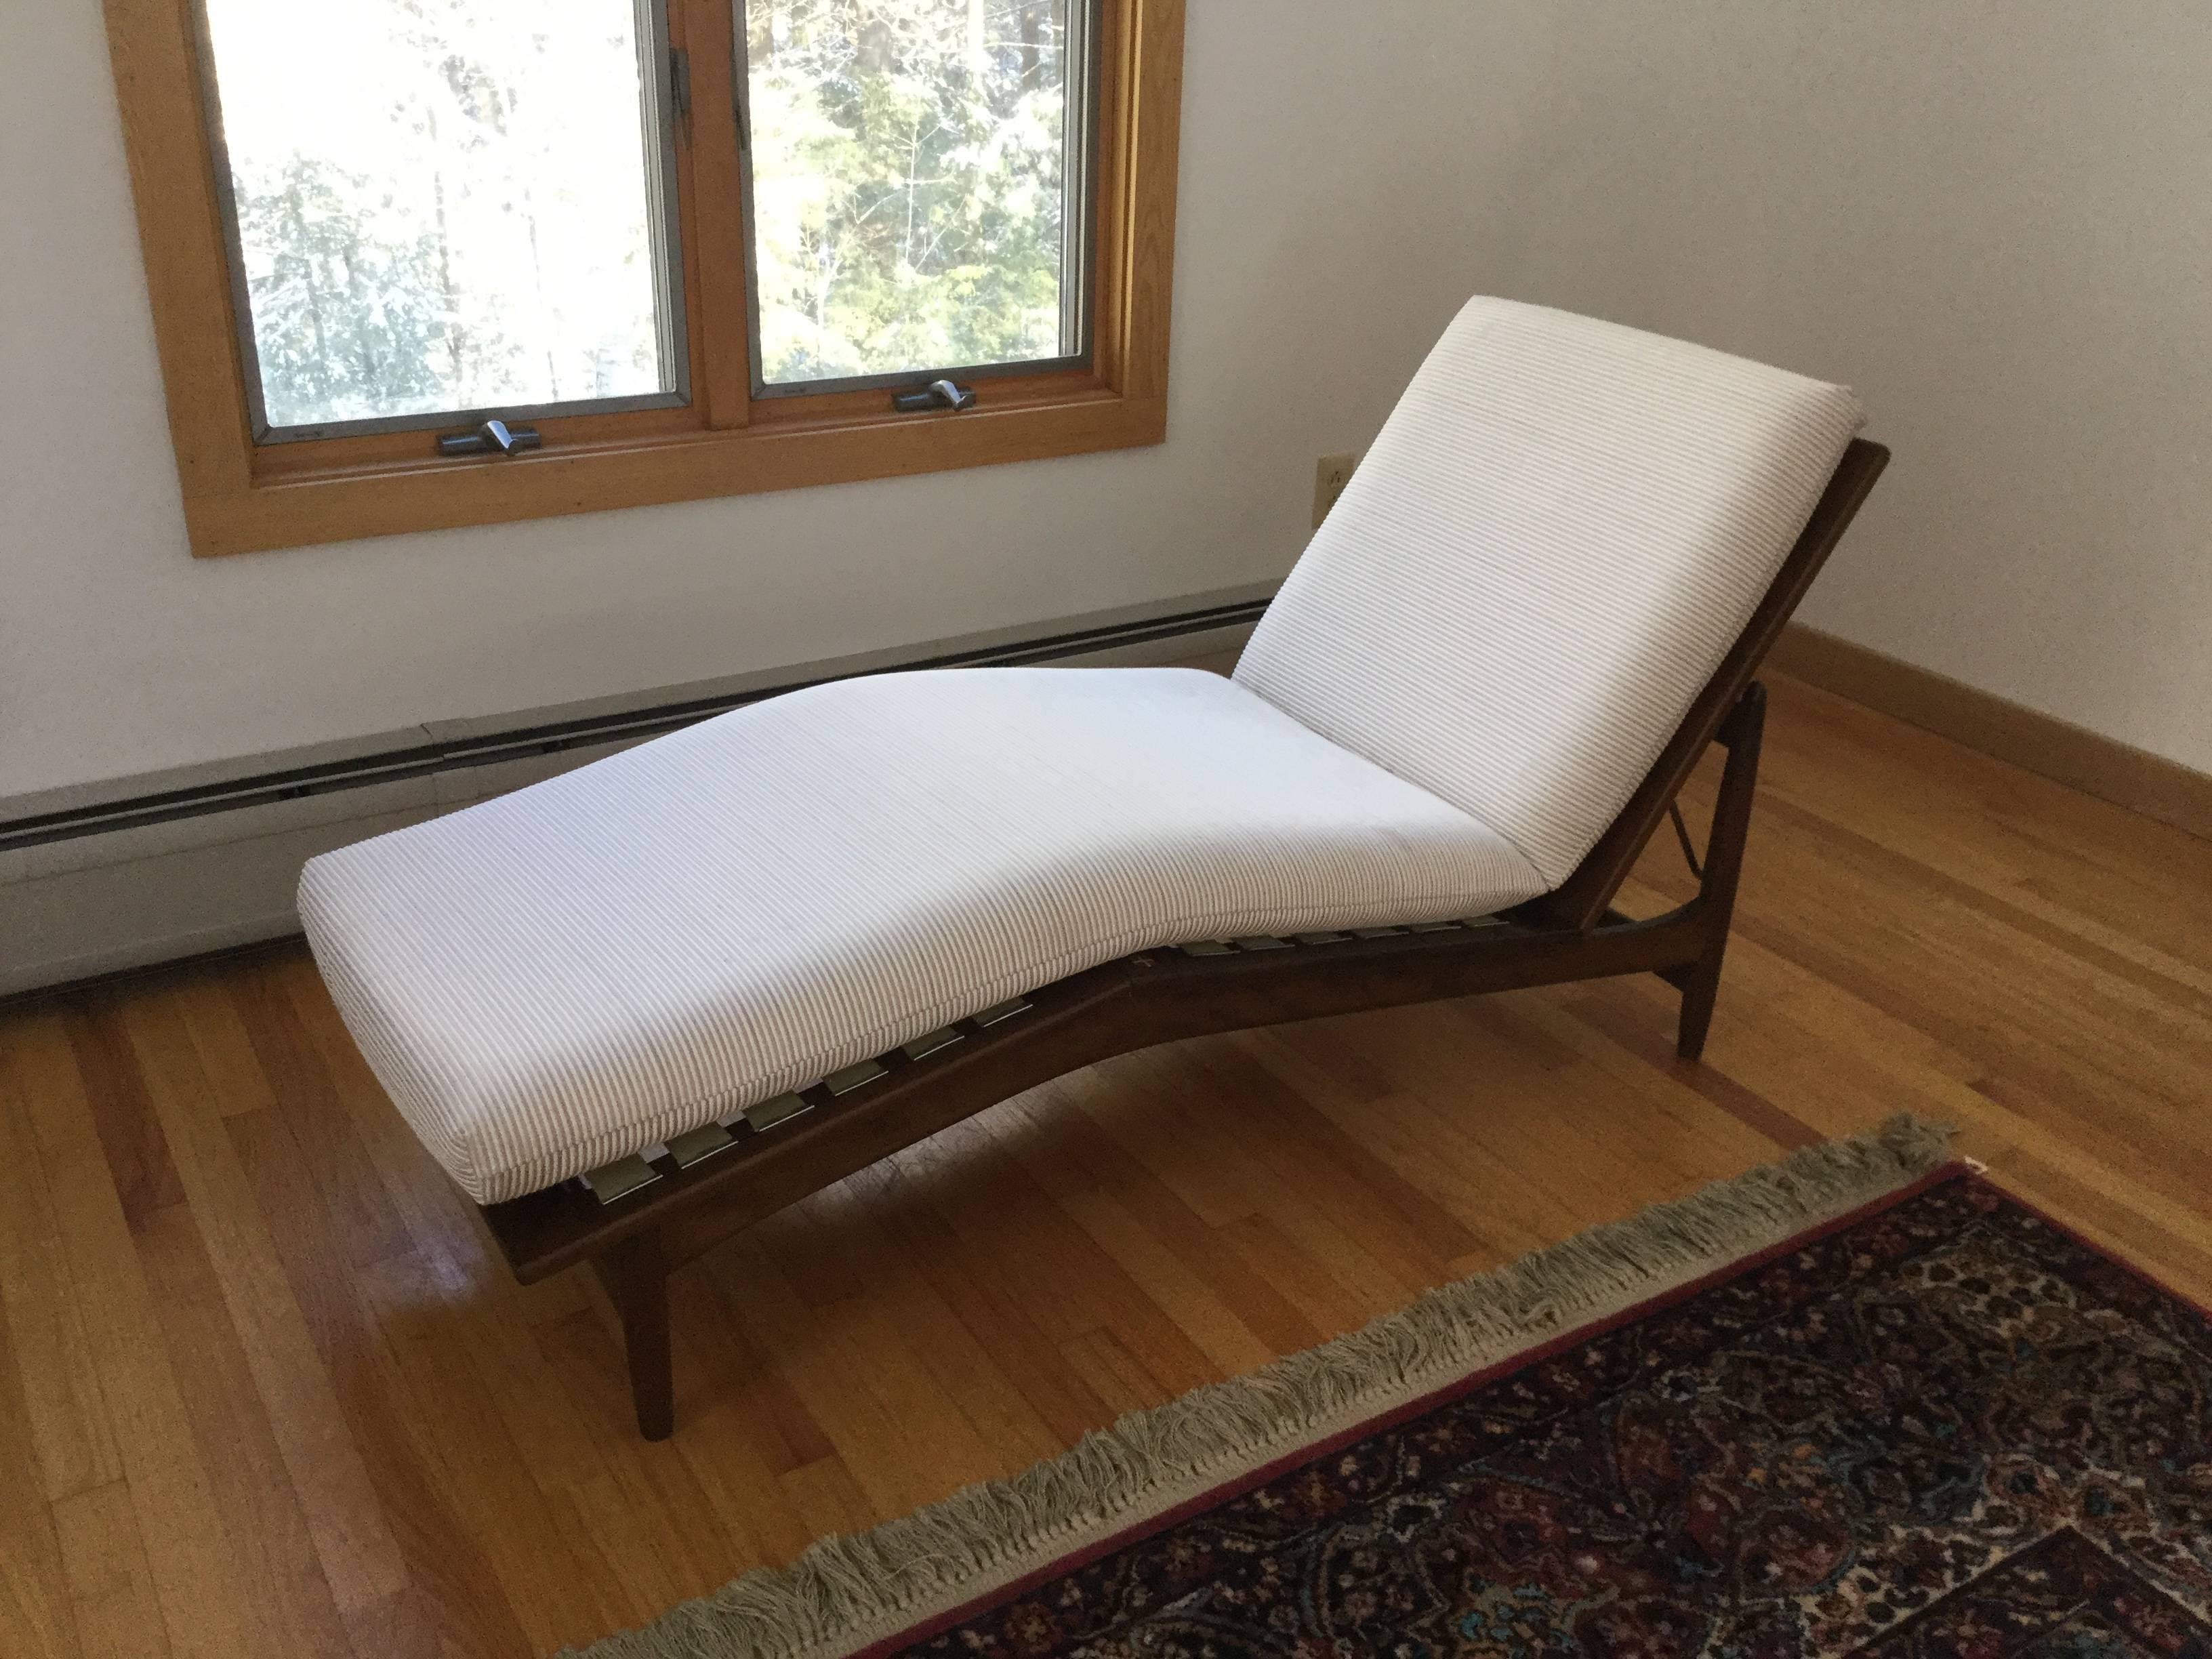 A wonderful chaise in fantastic all original condition.
Cushion is newer. A simple upholstery job is you desire.
Marked with Danish maker stamp.